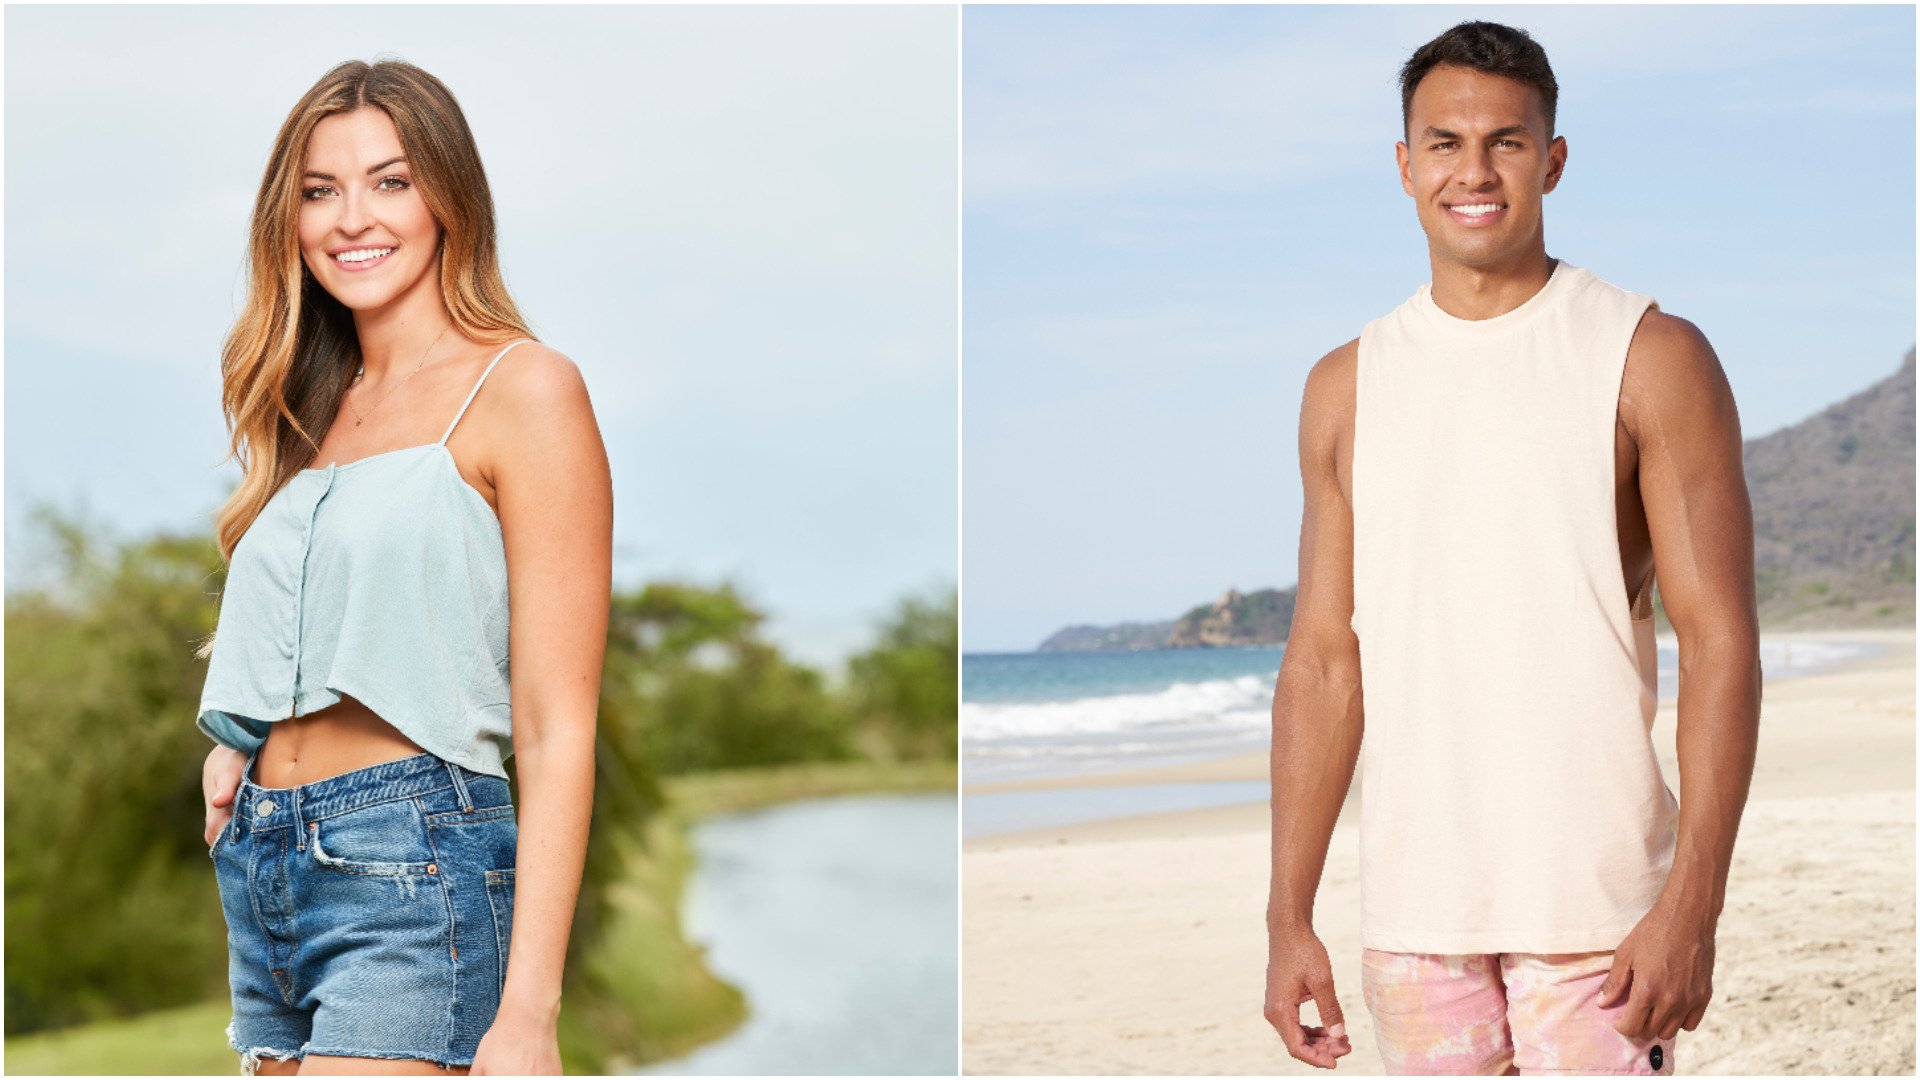 ‘Bachelor in Paradise’ Are Tia Booth and Aaron Clancy Still Together